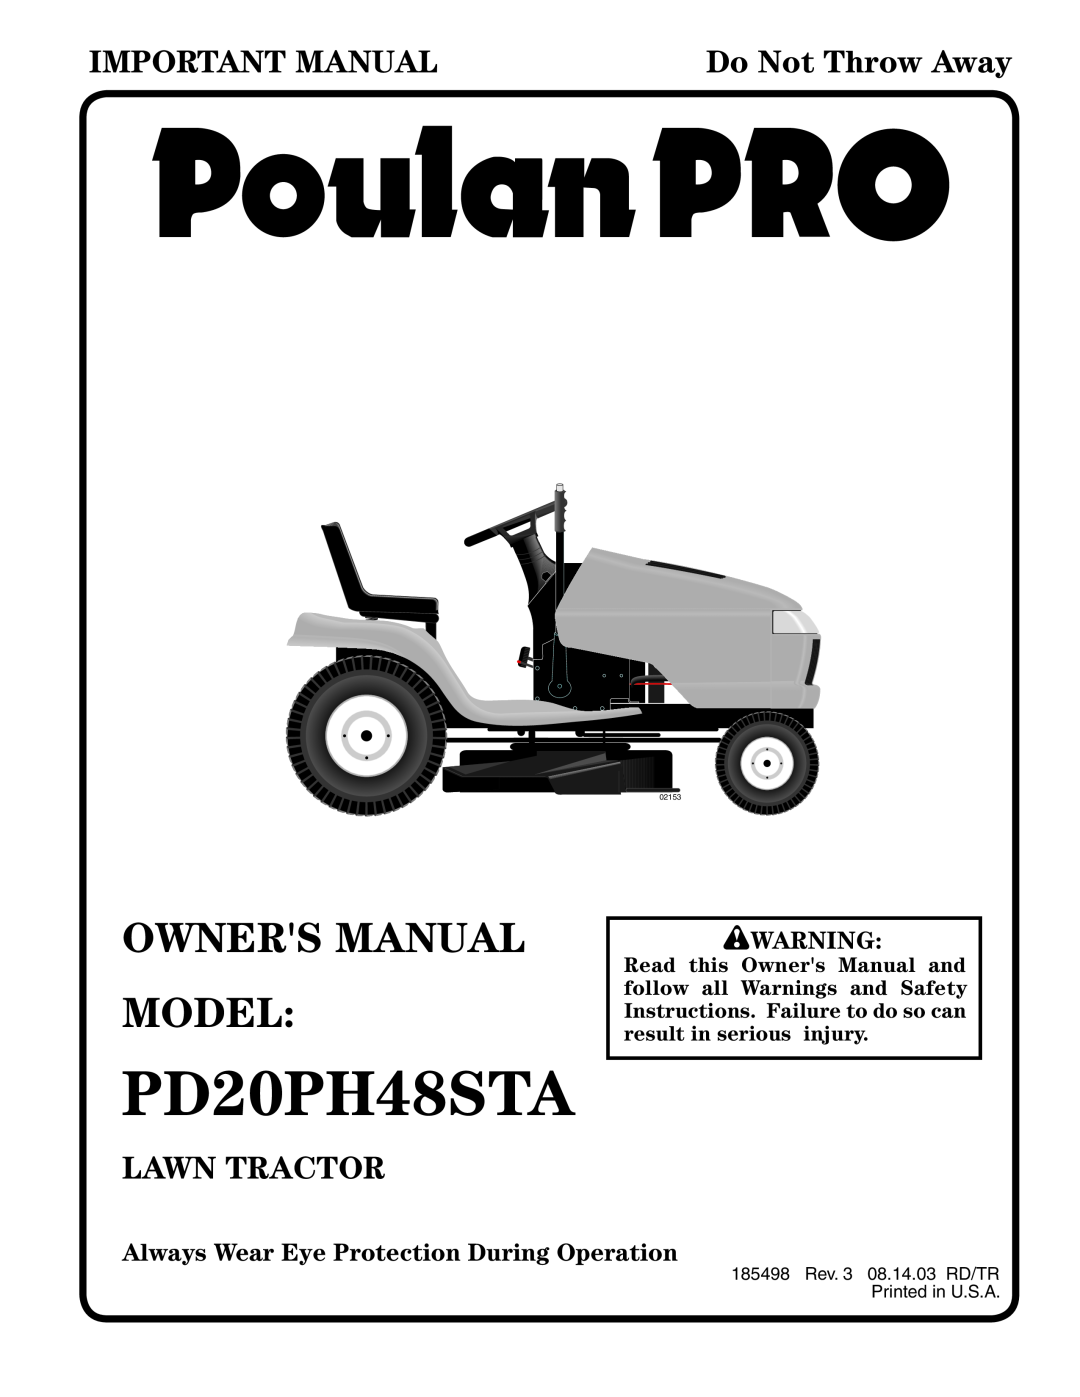 Poulan 185498 owner manual Owners Manual Model, Always Wear Eye Protection During Operation, PD20PH48STA, Important Manual 